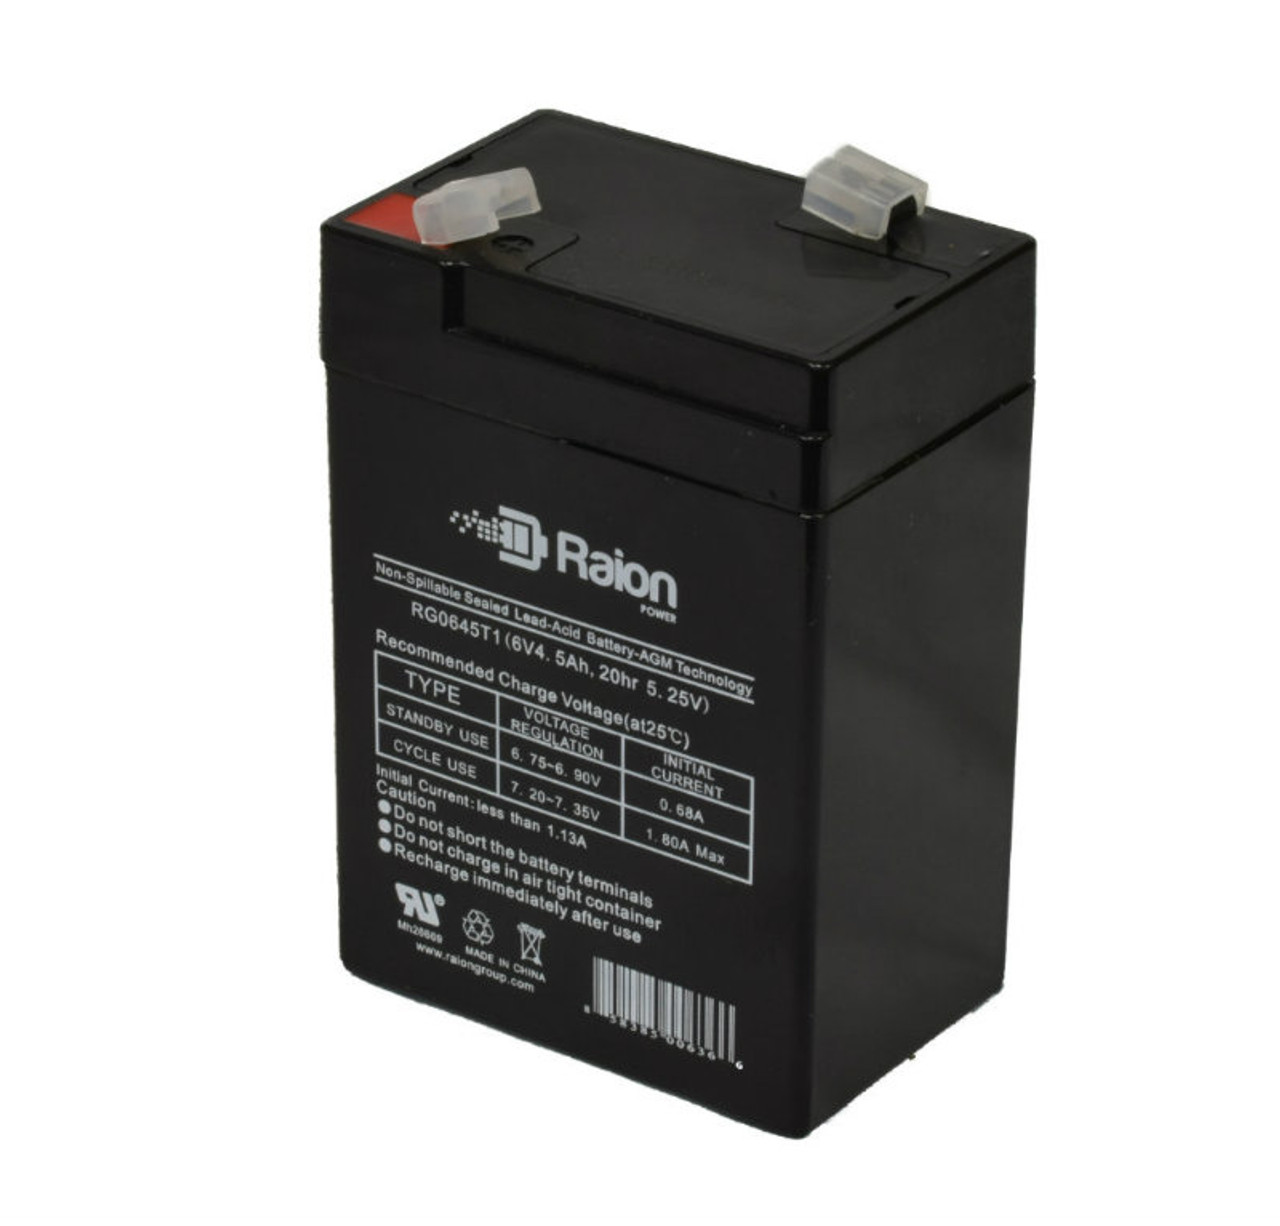 Raion Power RG0645T1 6V 4.5Ah Replacement Battery Cartridge for Big Beam 2ET6S5